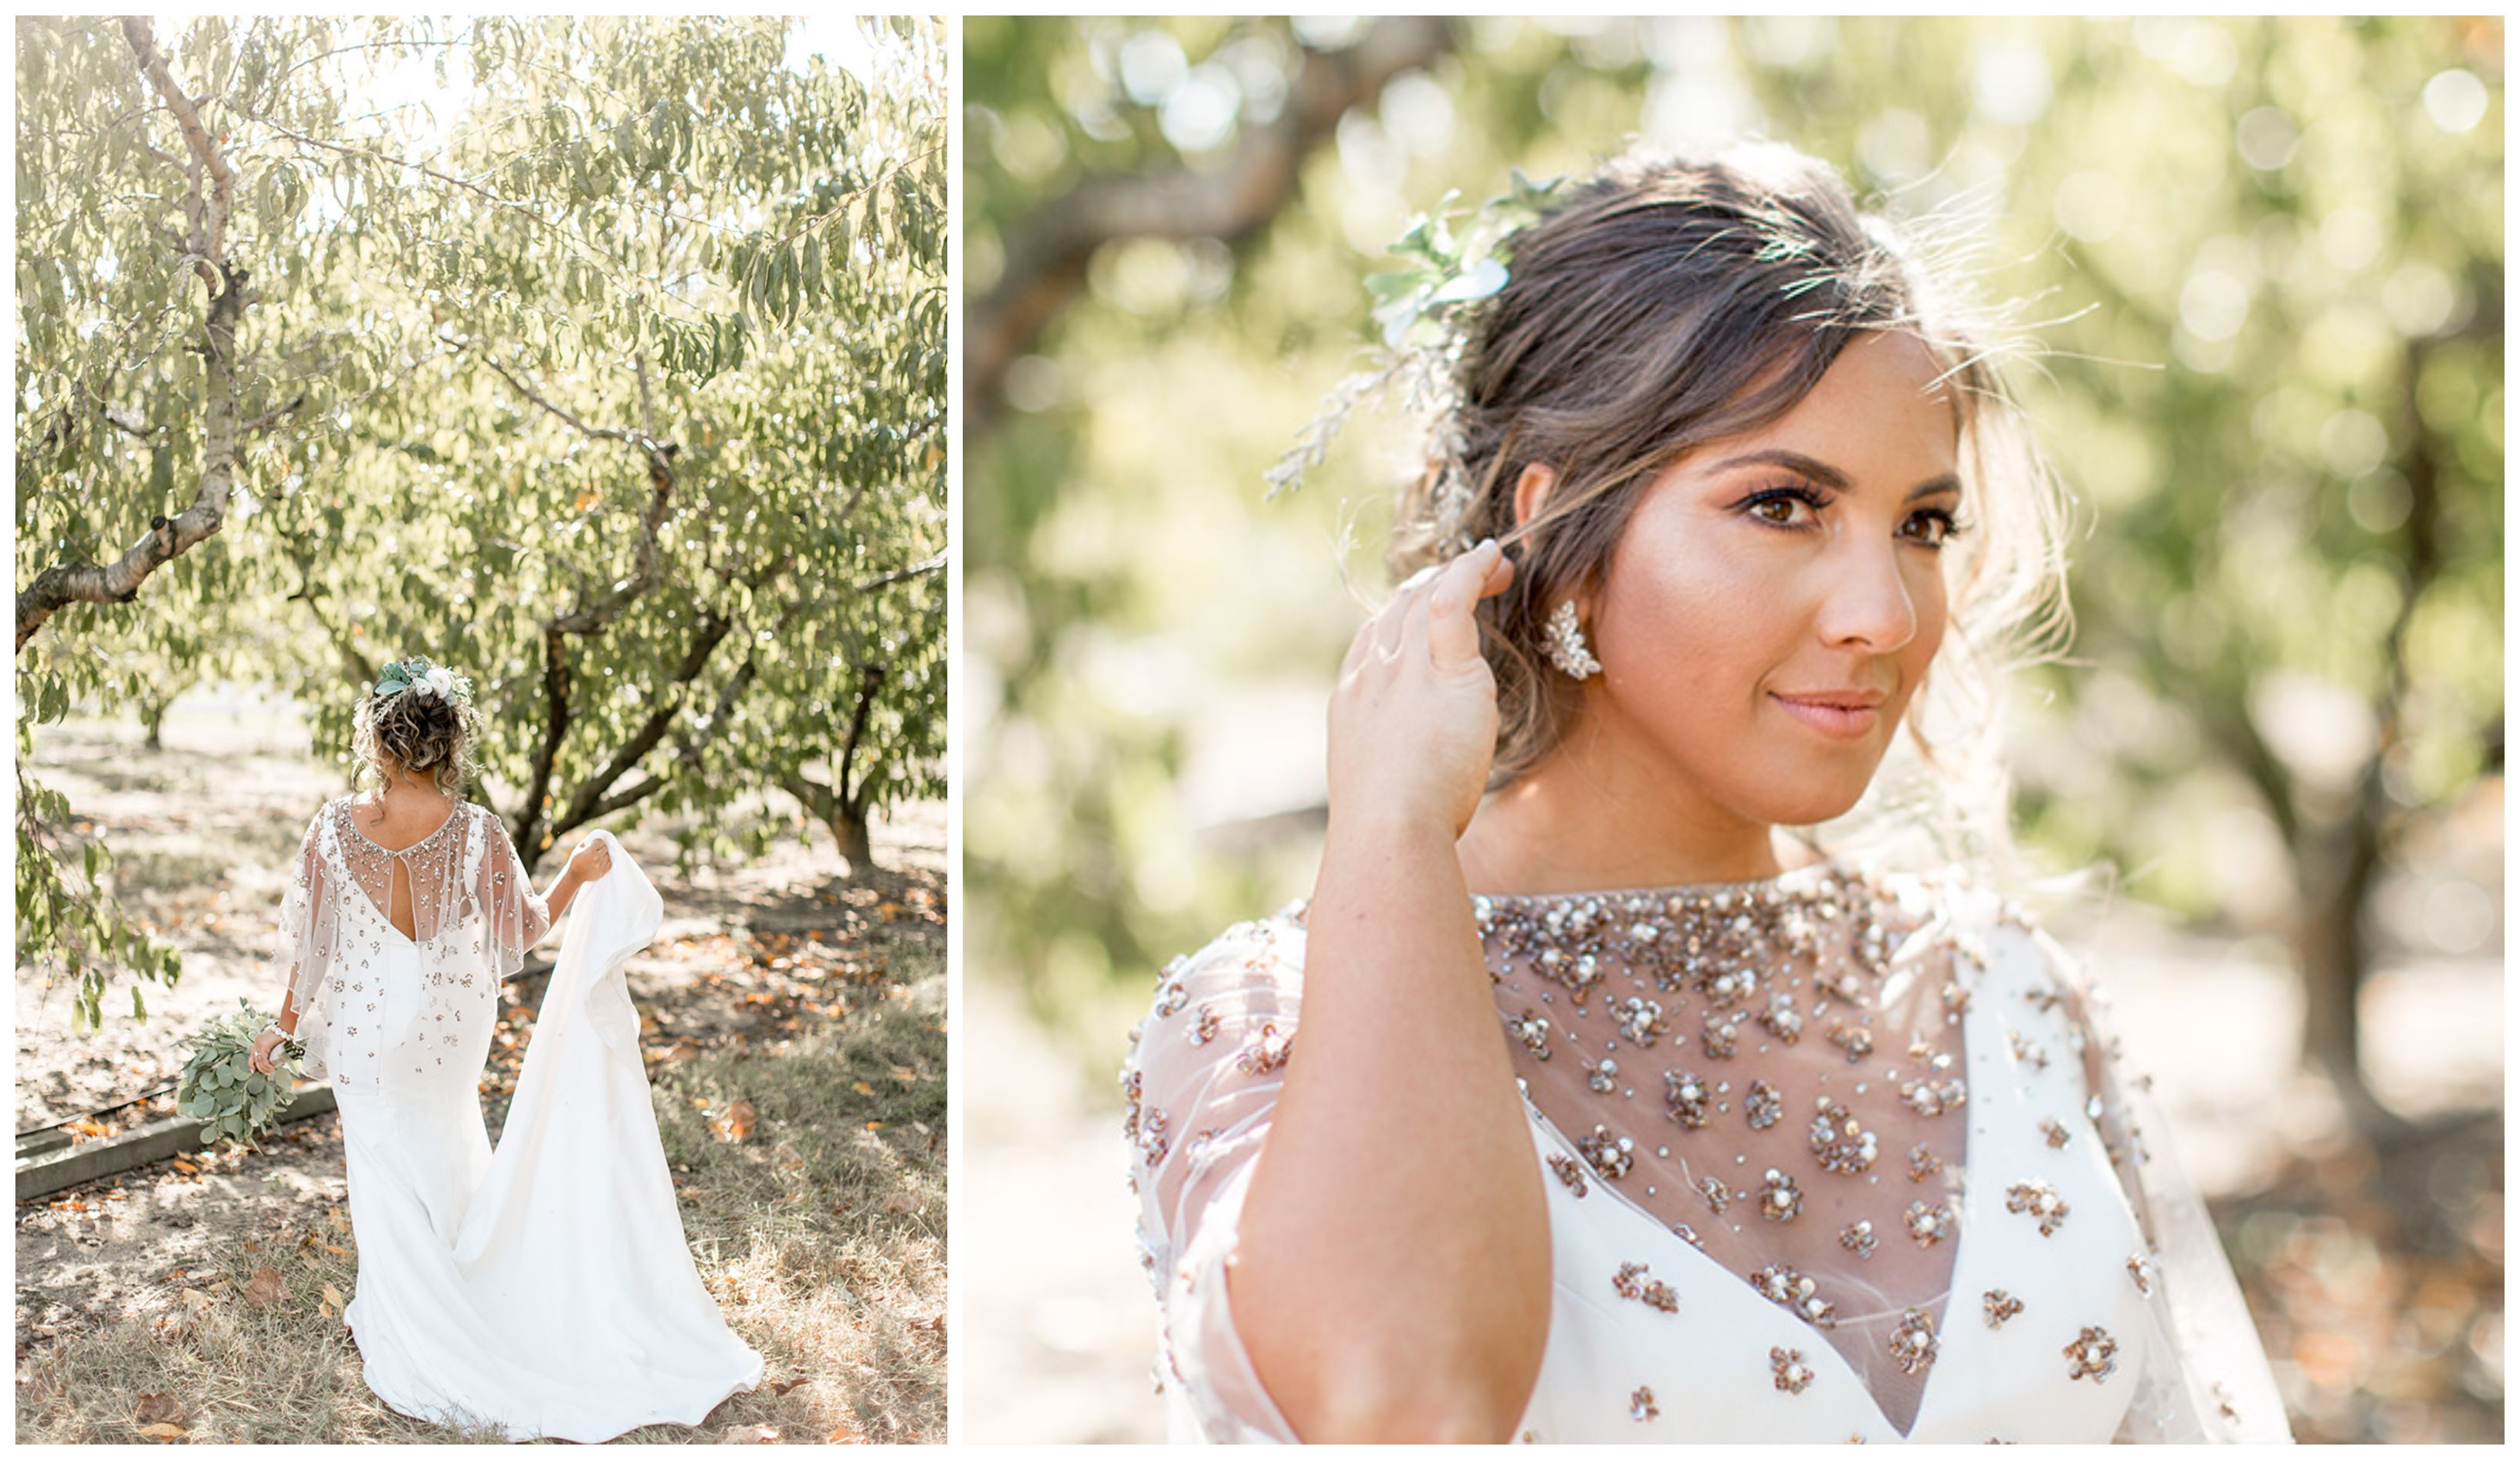 Bride in modern dress with romantic details